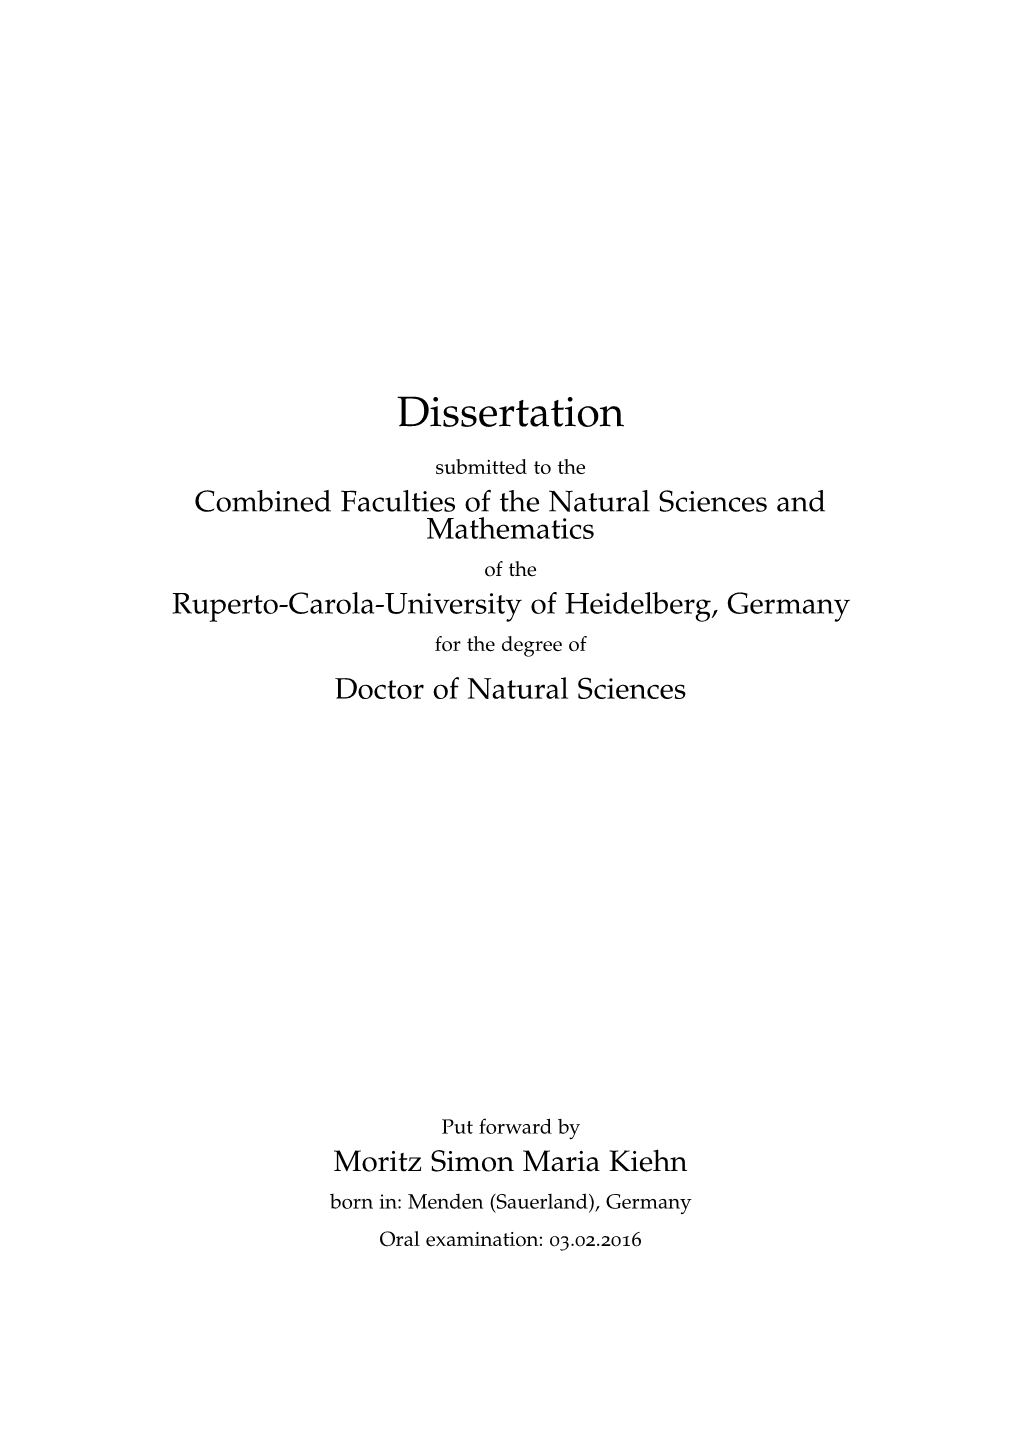 Combined Faculties of the Natural Sciences and Mathematics of the Ruperto-Carola-University of Heidelberg, Germany for the Degree of Doctor of Natural Sciences